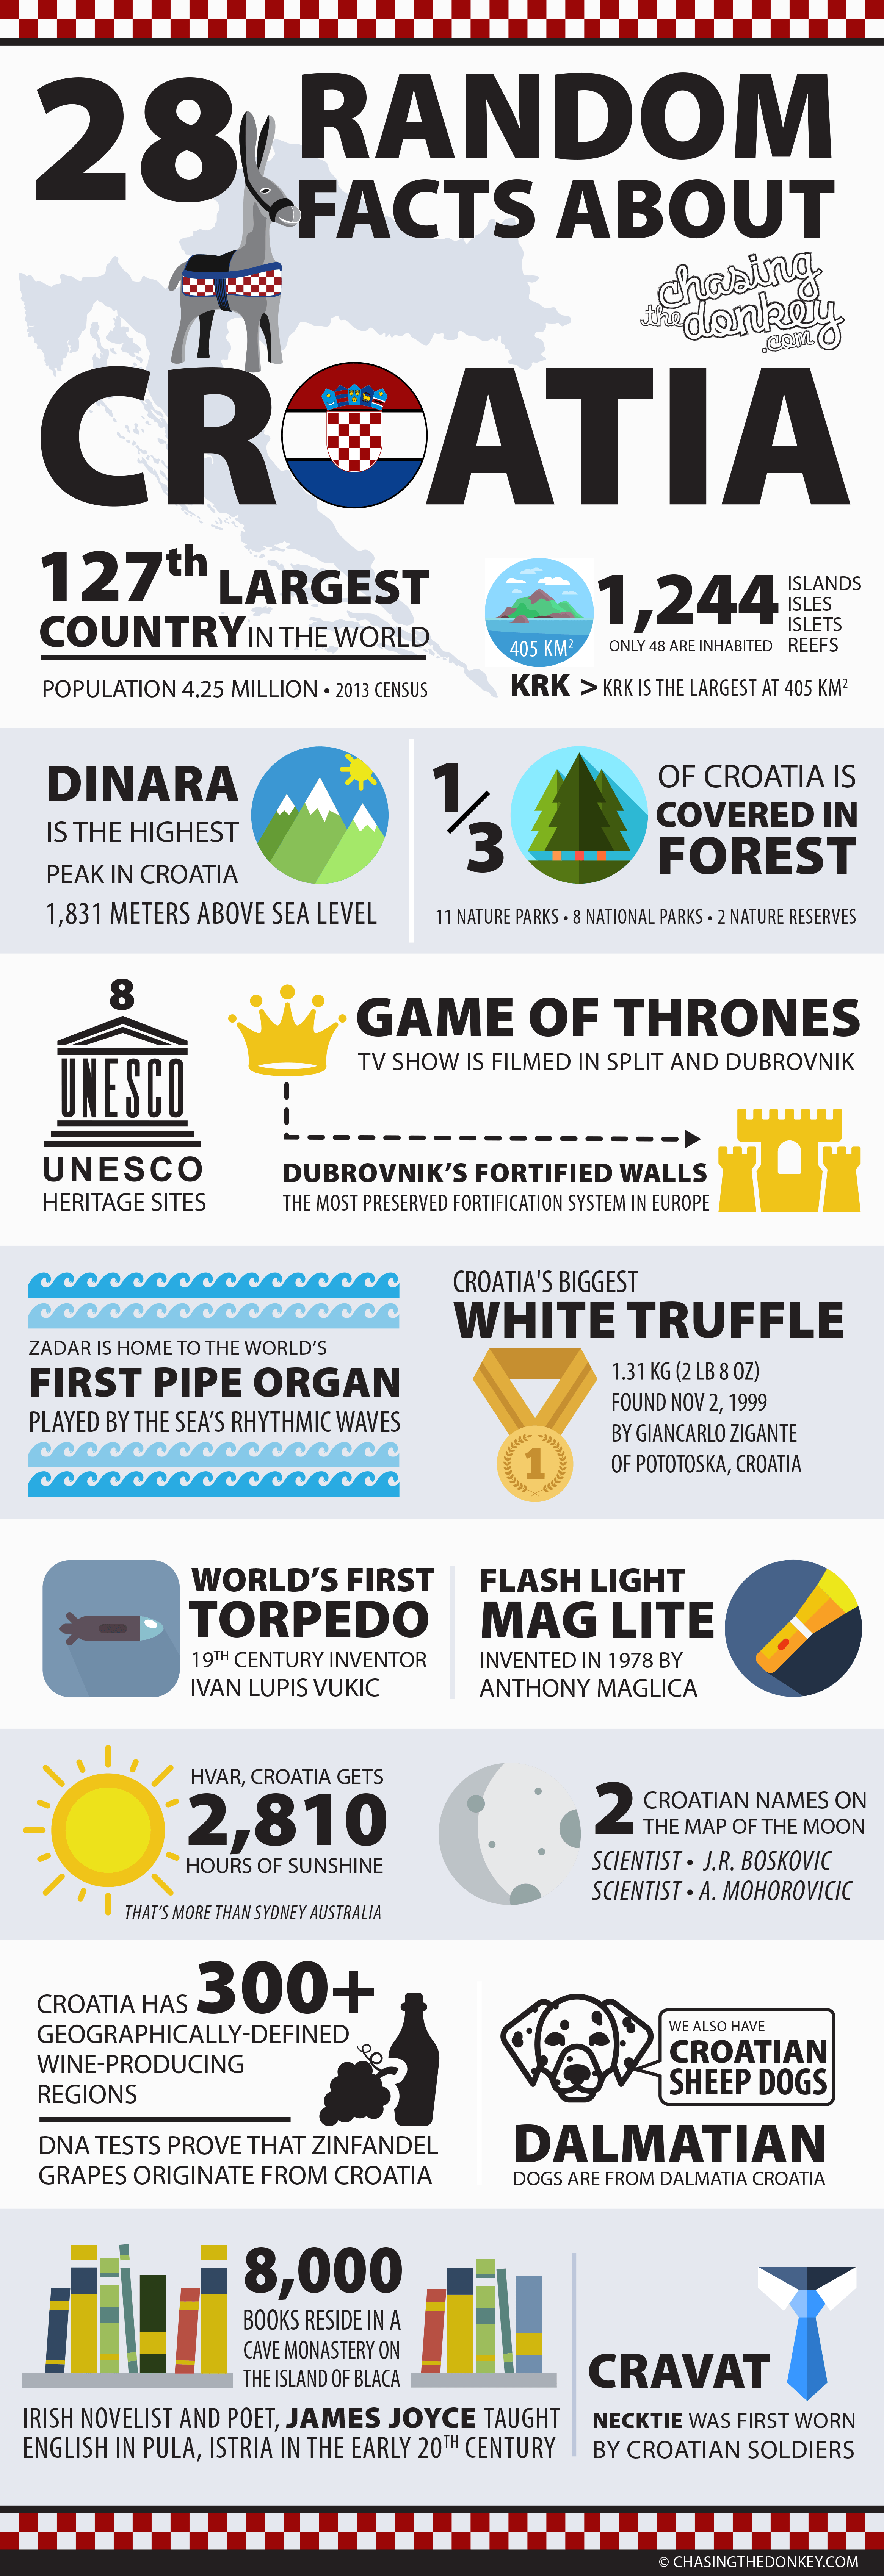 Facts About Croatia Infographic - Croatia Travel Blog